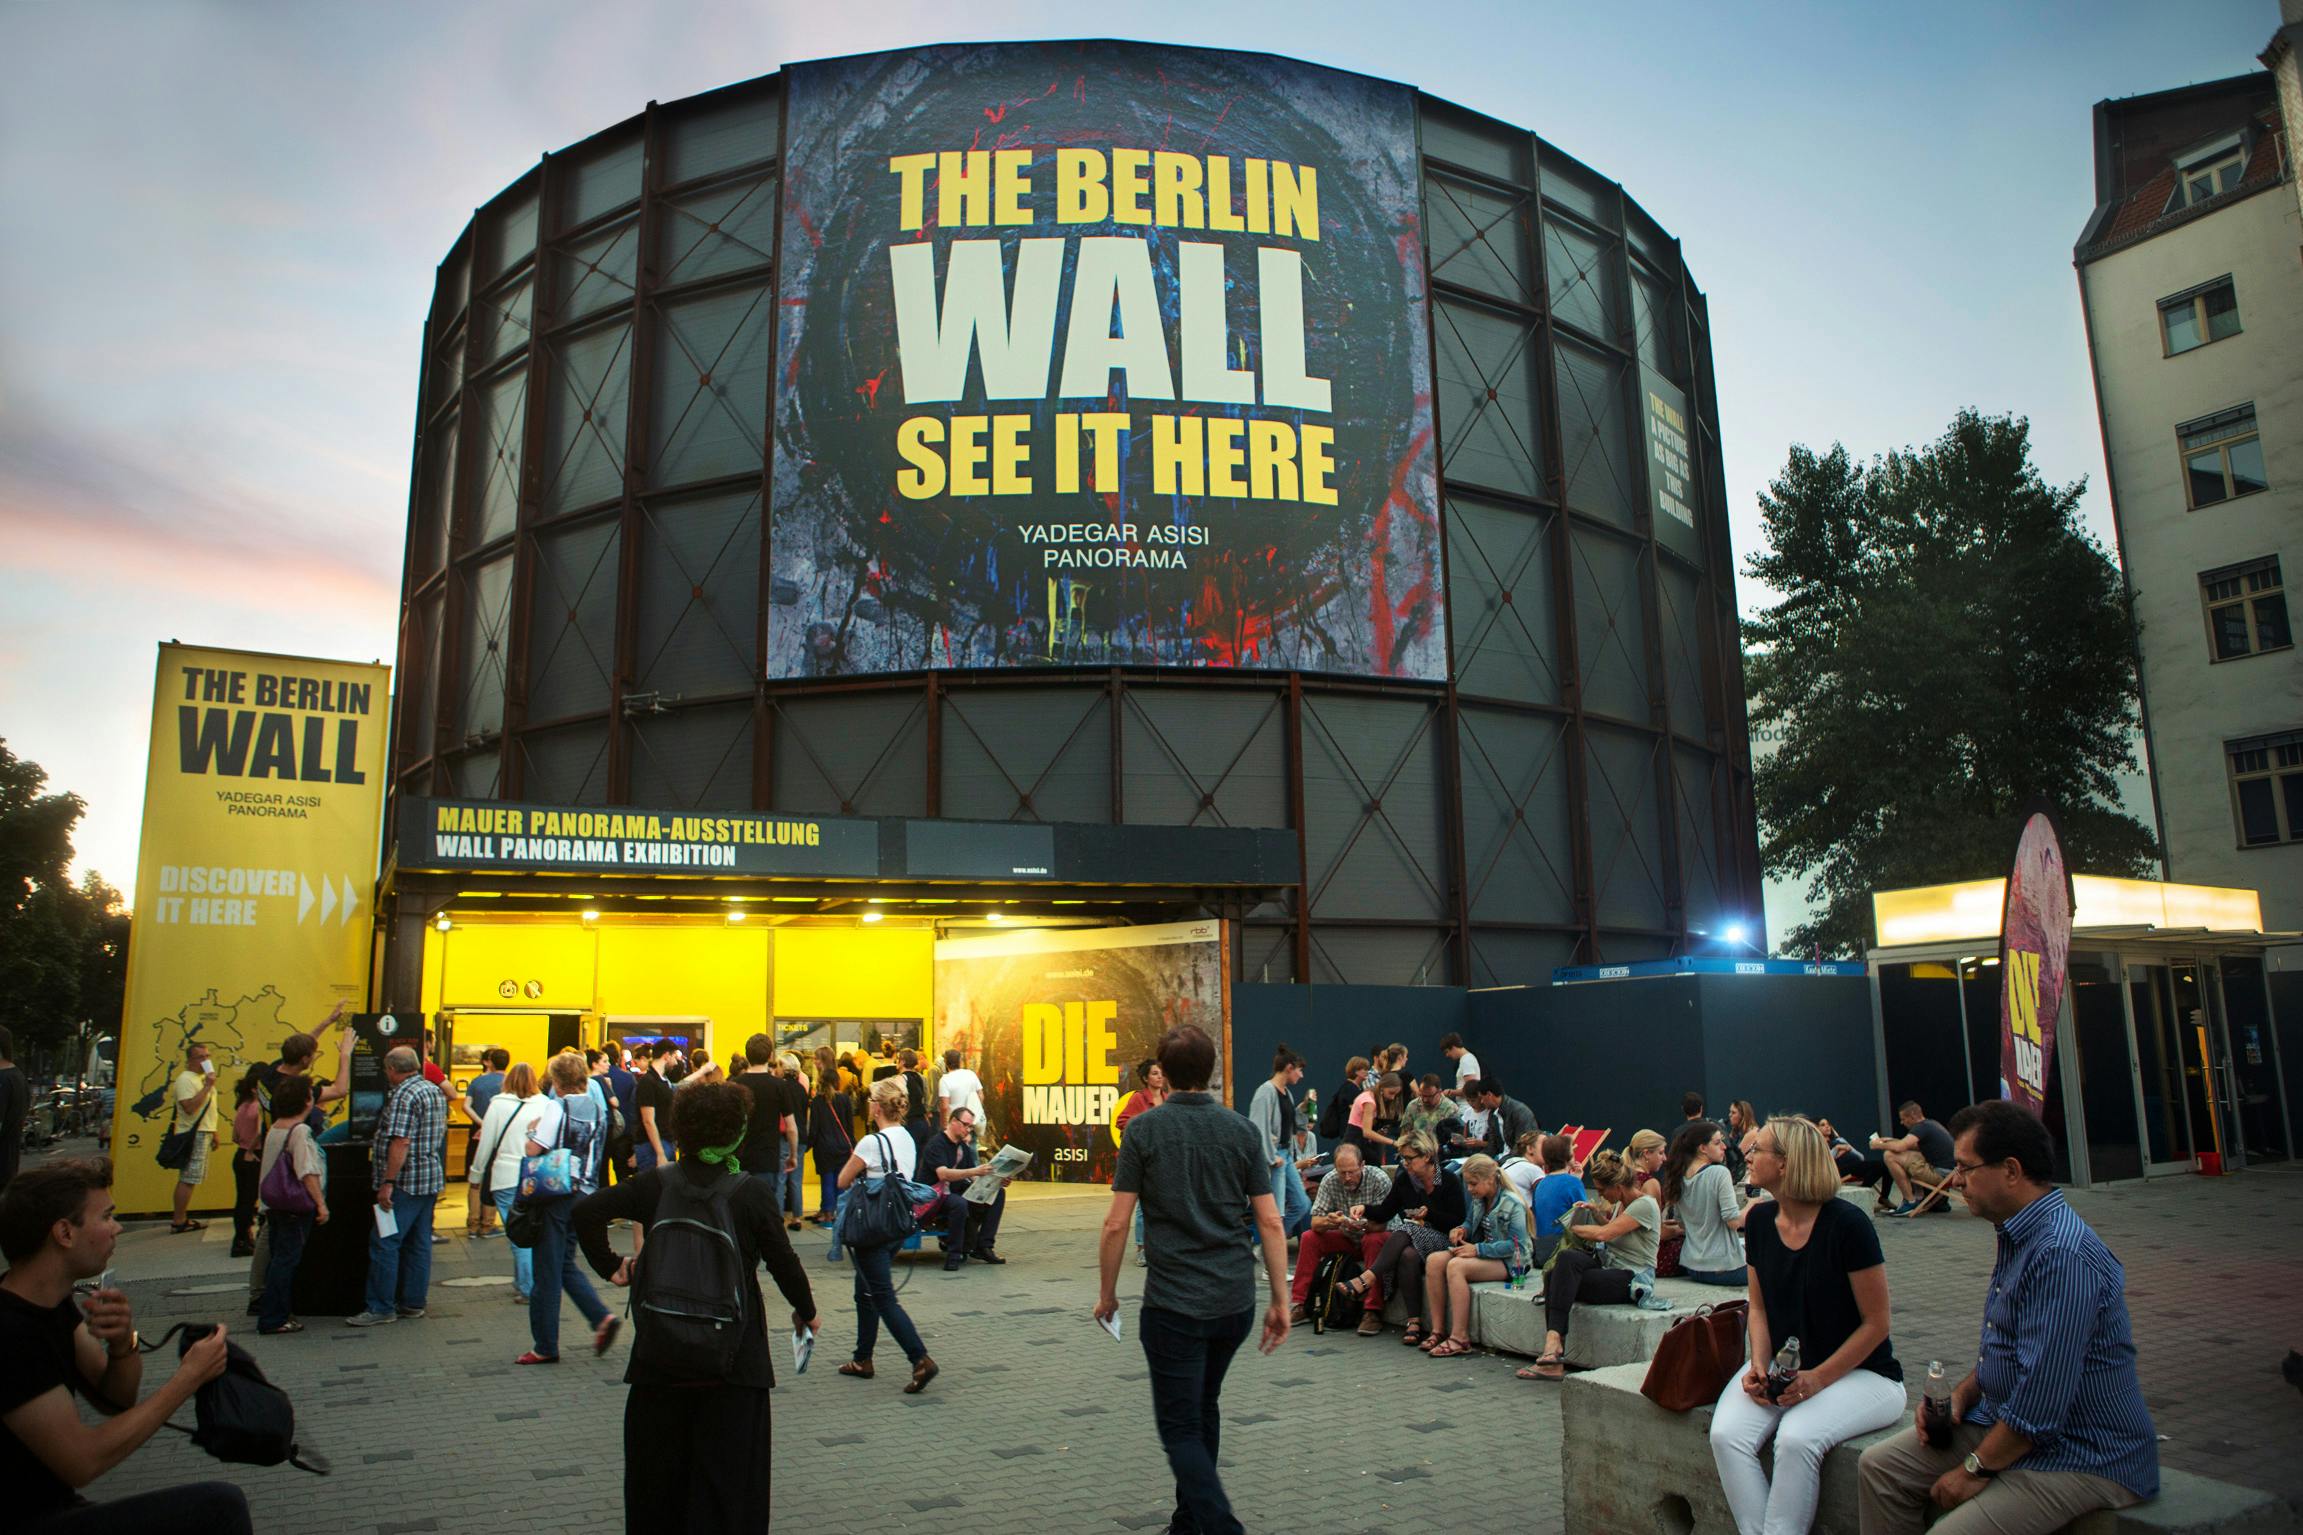 Tickets to ASISI PANORAMA BERLIN with the exhibition THE WALL